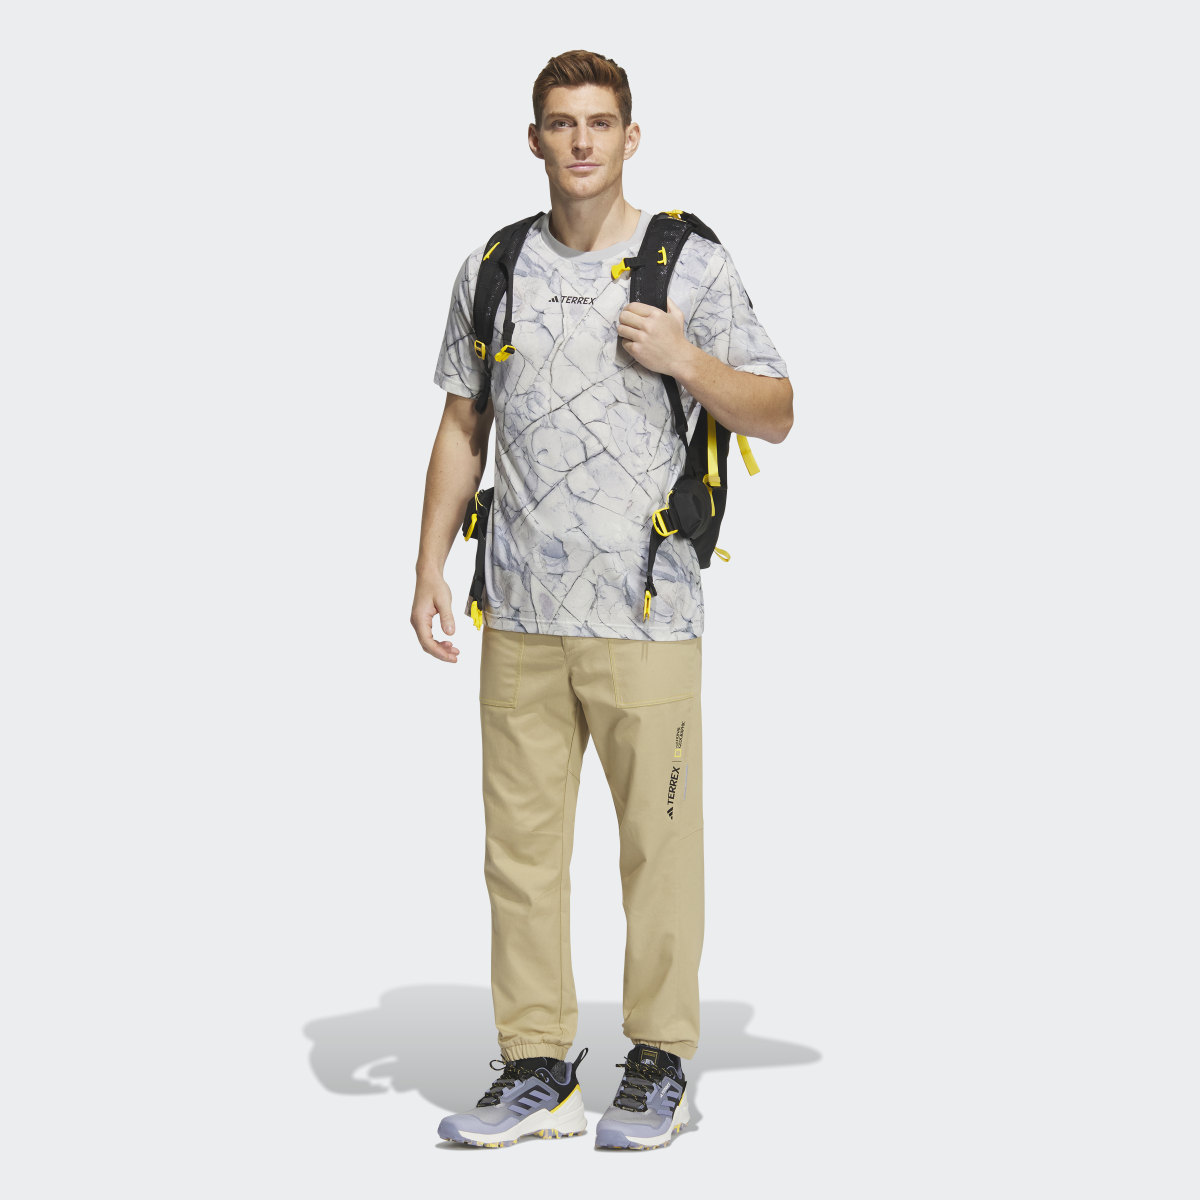 Adidas National Geographic Twill Pants. 5